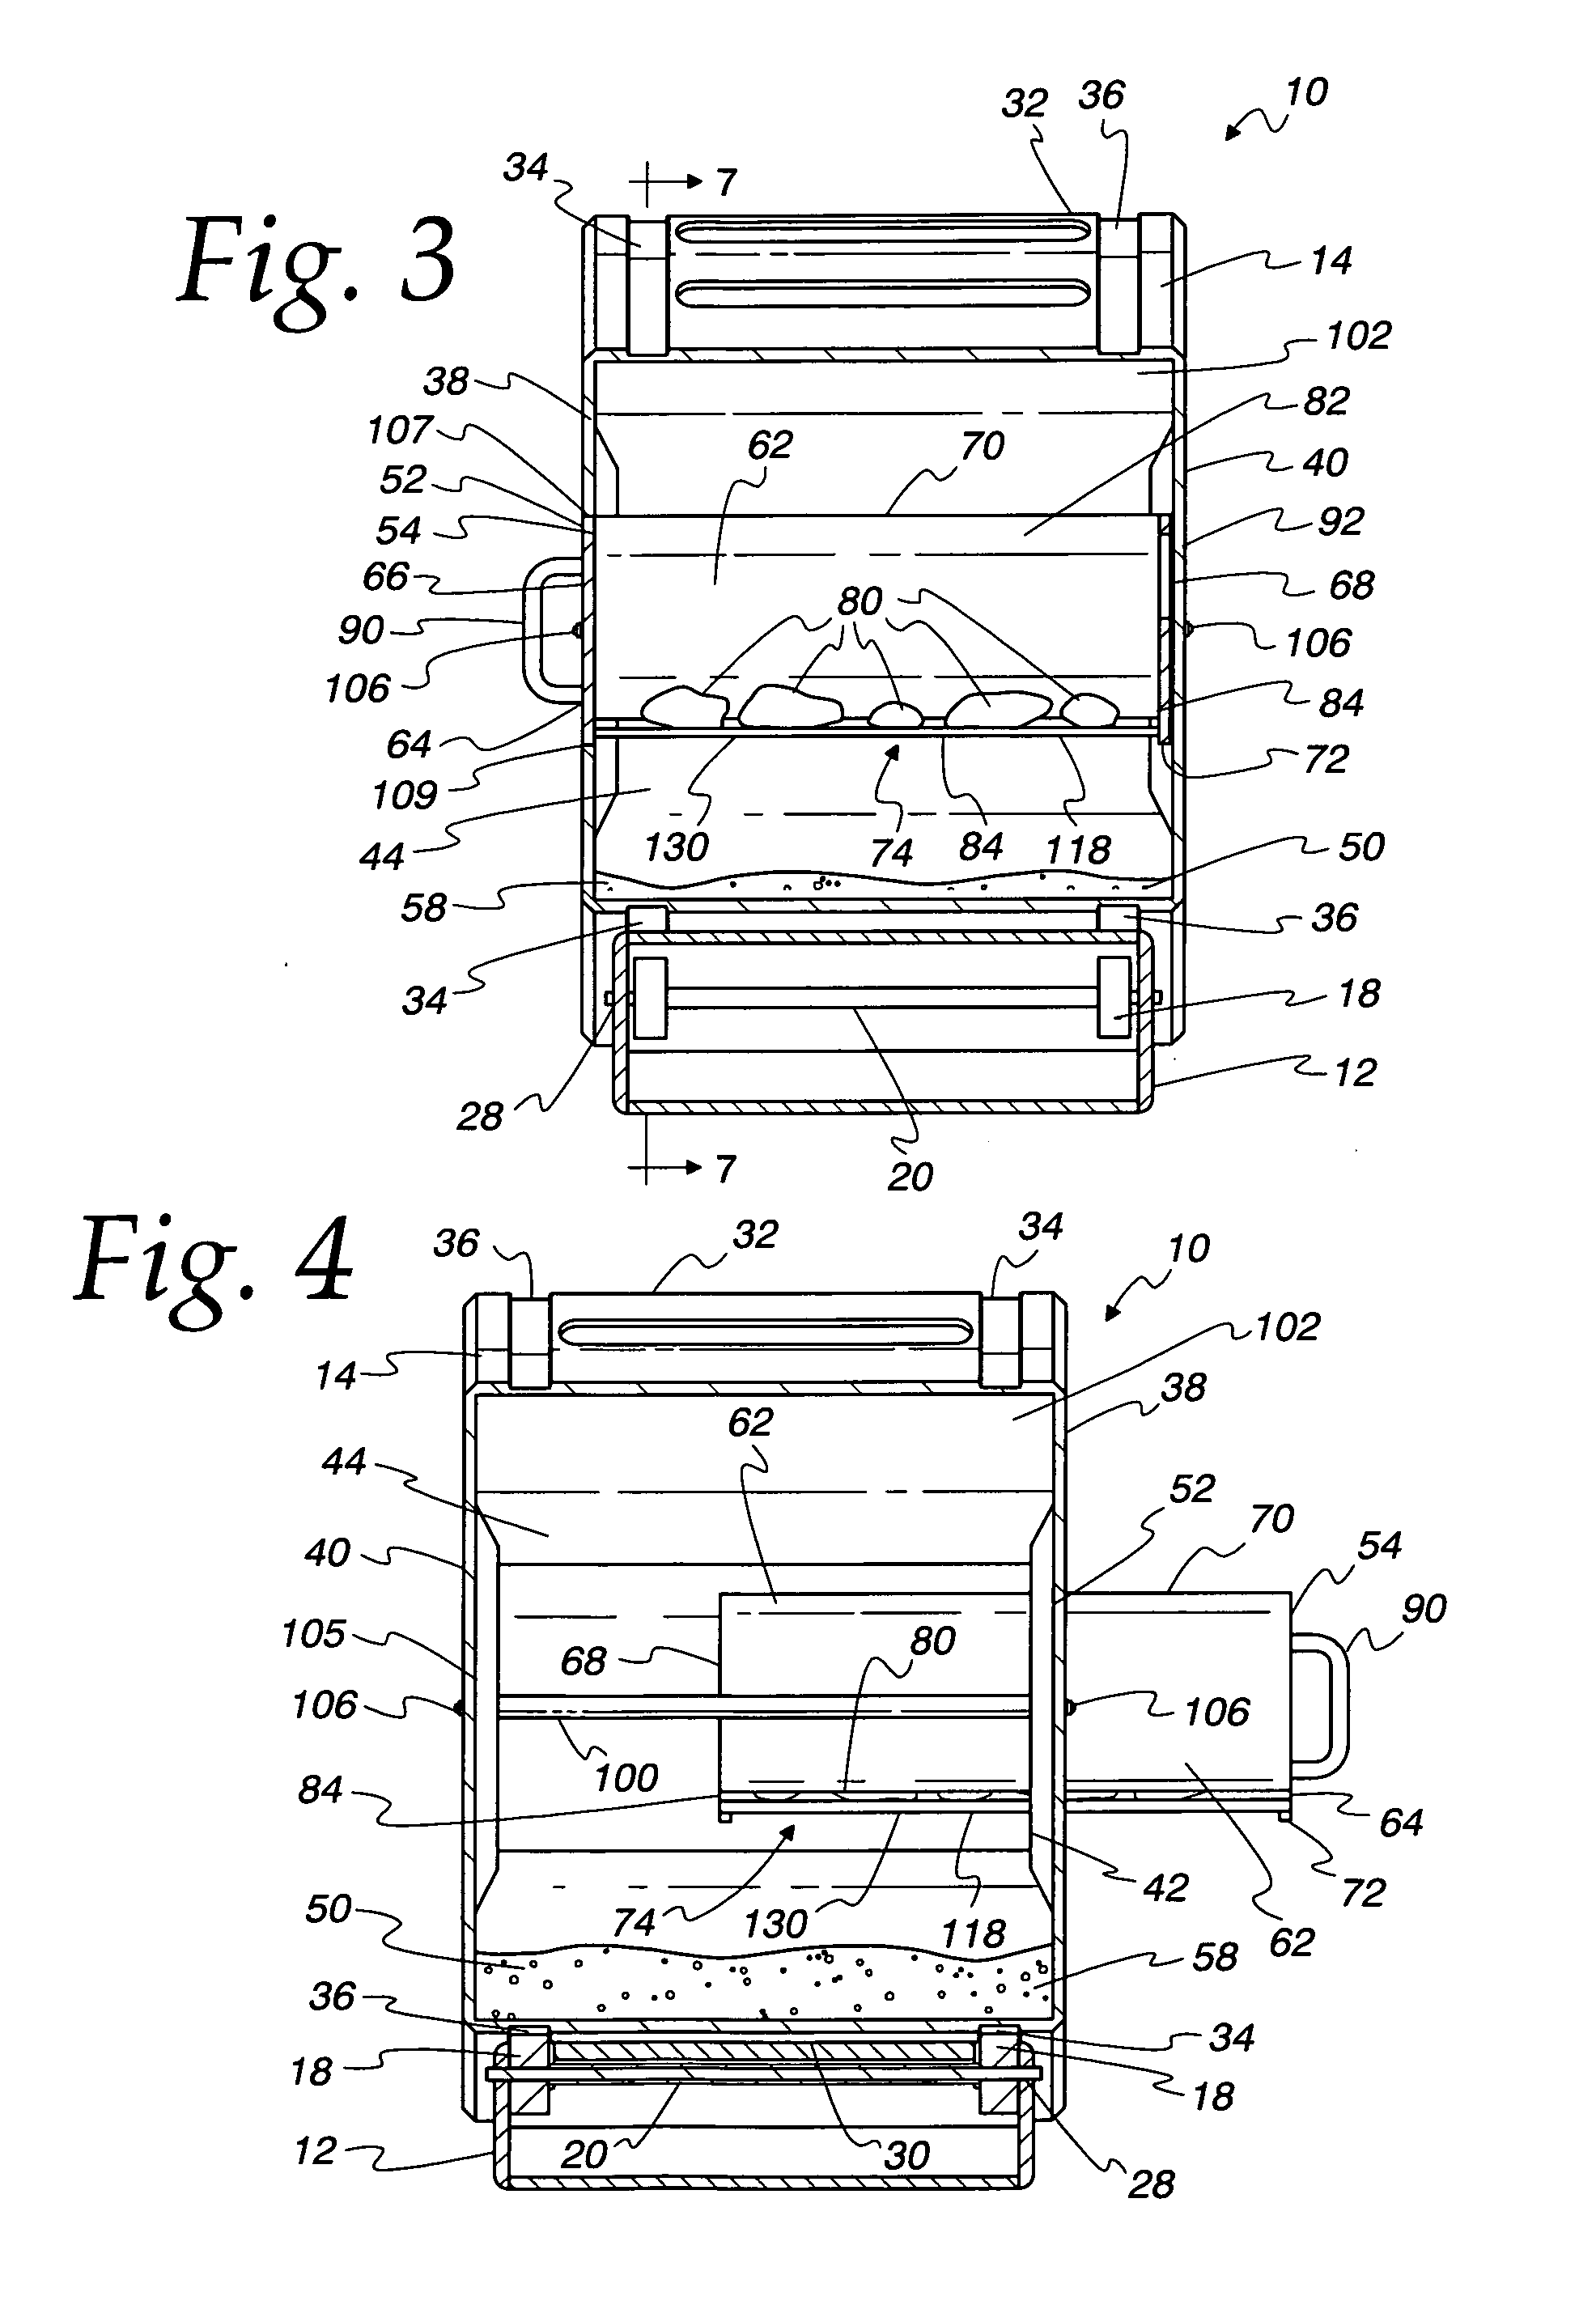 Apparatus and method for handling animal waste